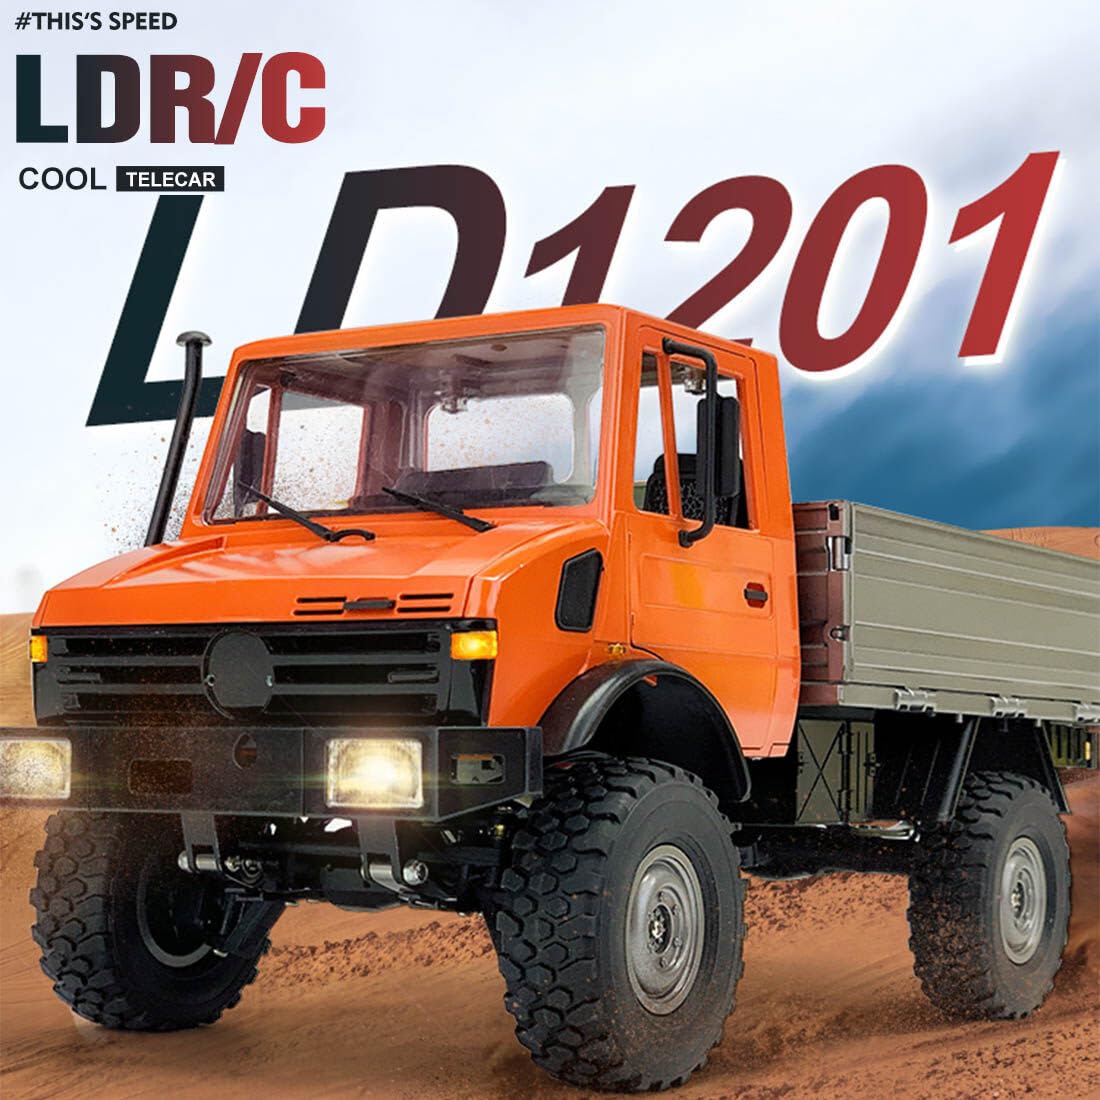 KAROYD RC Unimog Army (USSR) Truck LD-1201 1/12 2.4G 5CH Climbing Military Truck Model Vehicle (Updated RTR Version)